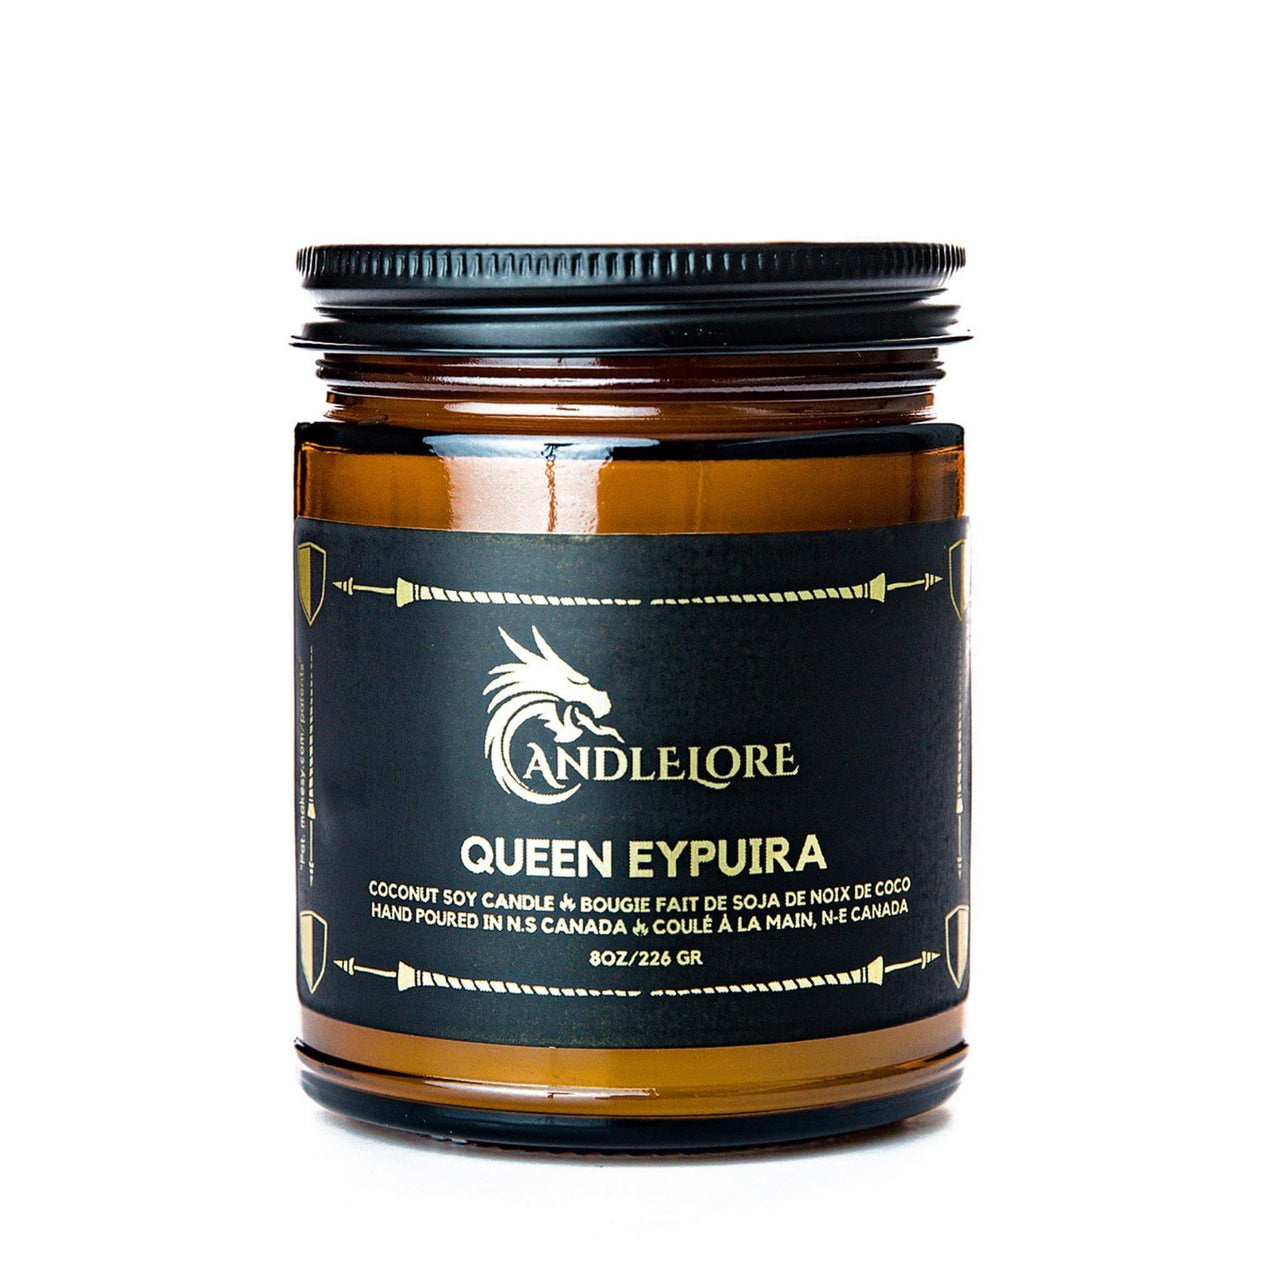 Medium Queen Eypuira Candle on white background